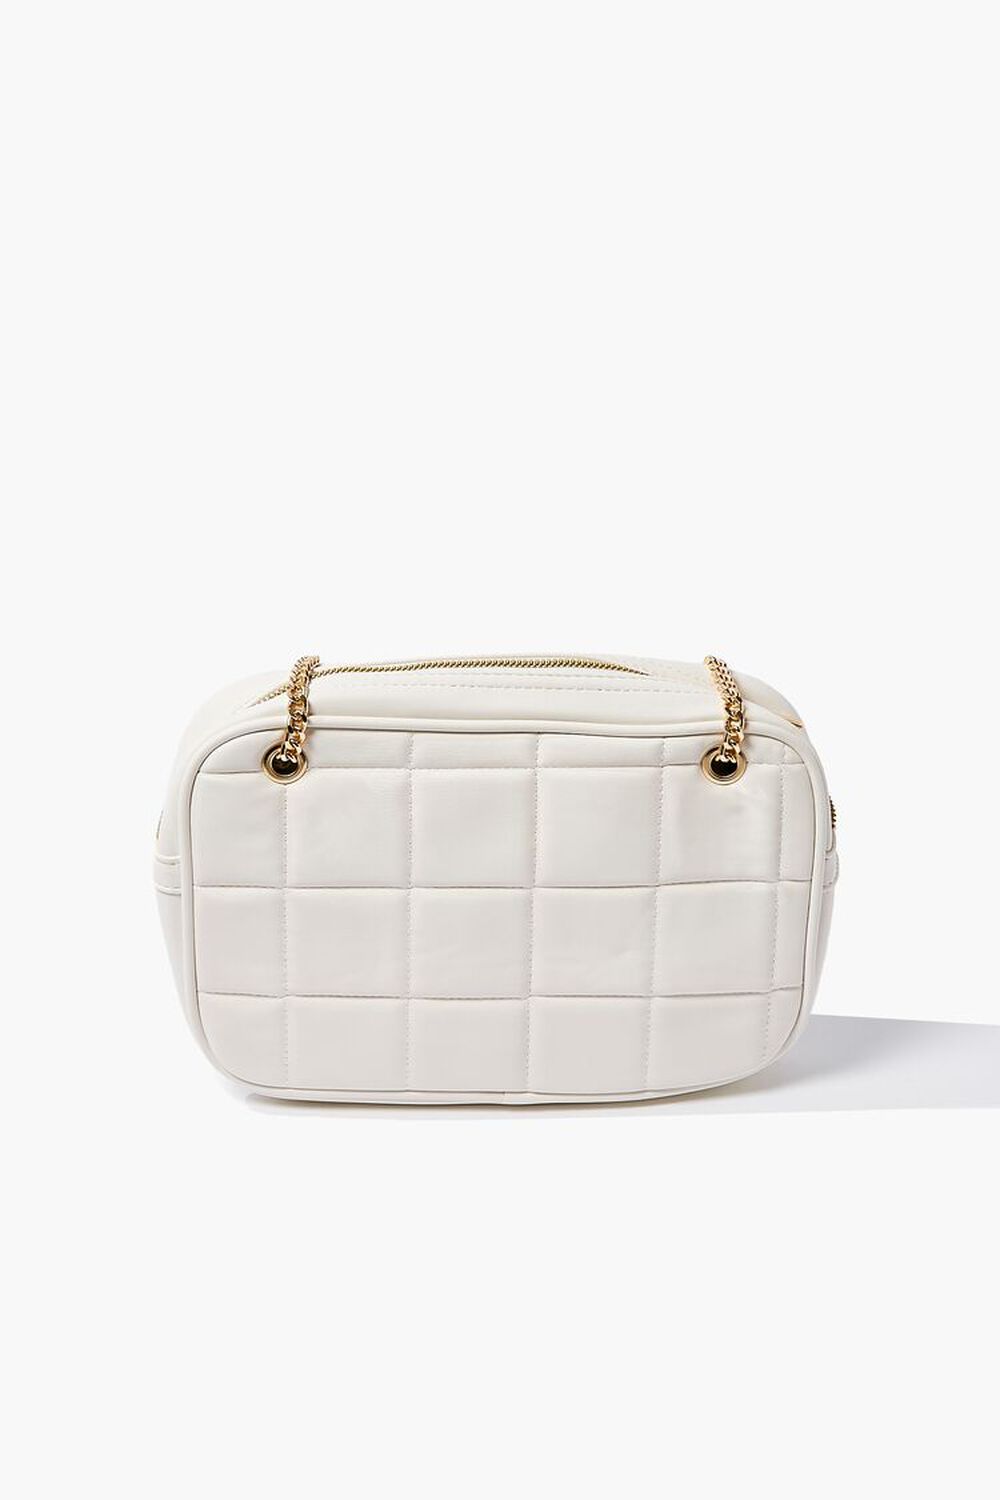 WHITE Quilted Crossbody Bag, image 2